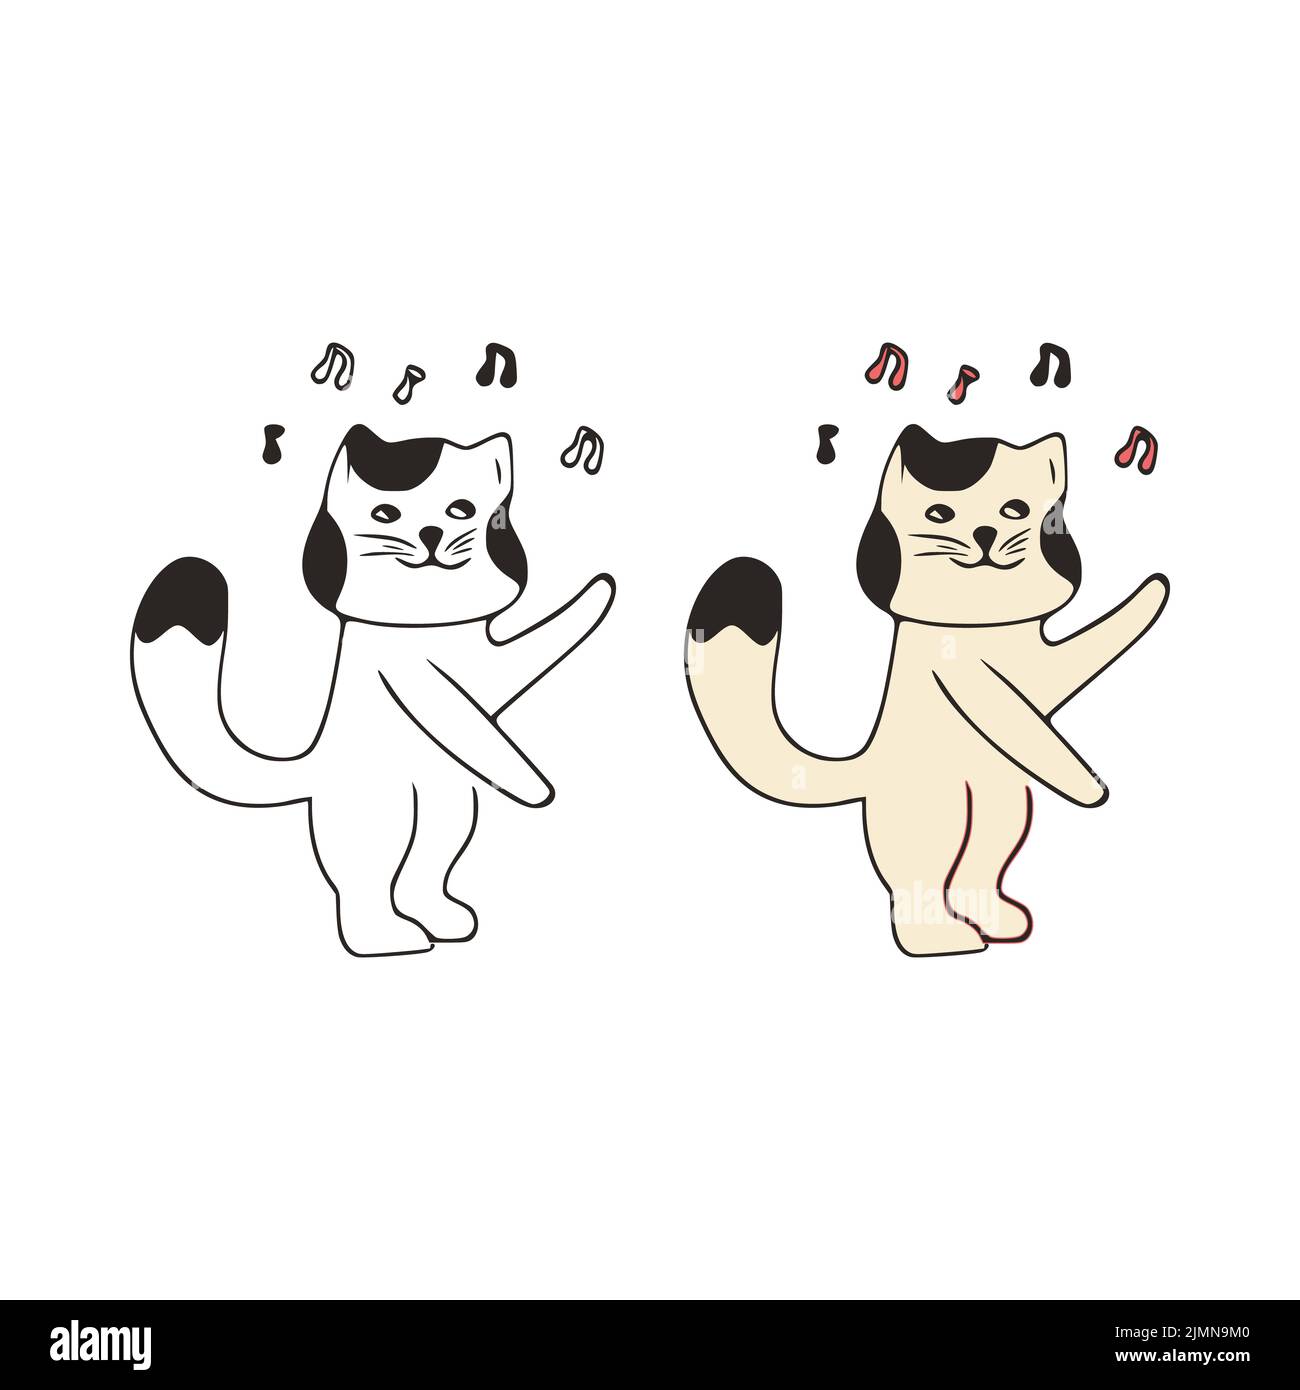 Funny cat dancing with the music doodle icon. Cute pets vector art on white background. Stock Photo